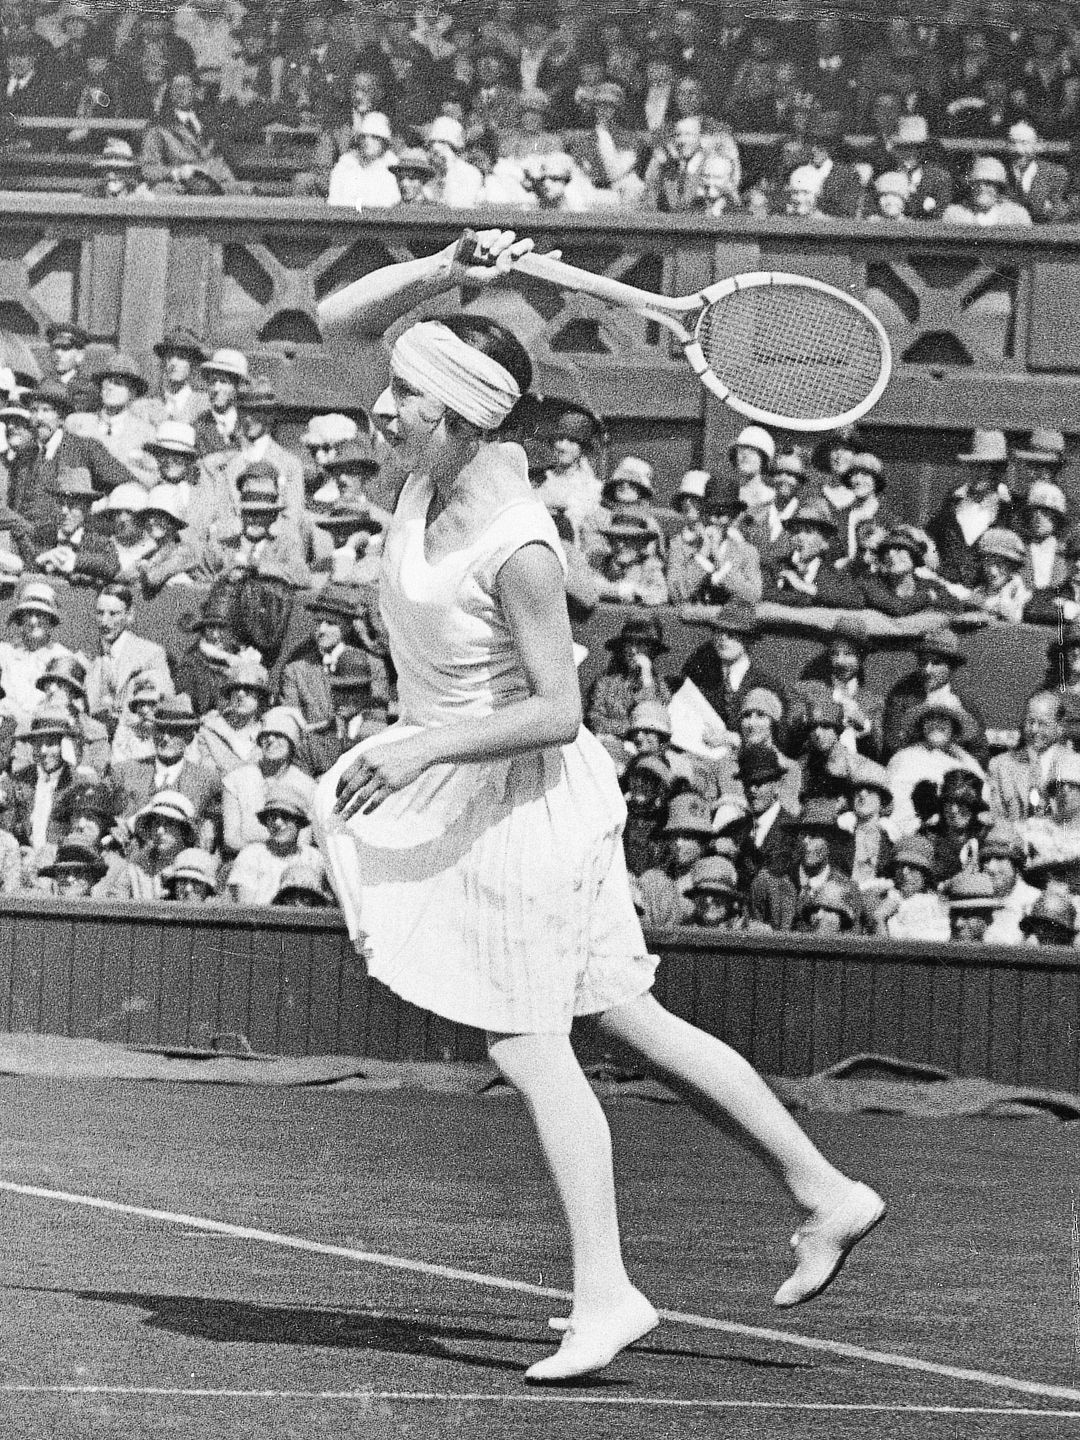 French tennis player Suzanne Lenglen during a match in Wimbledon during the 1920s